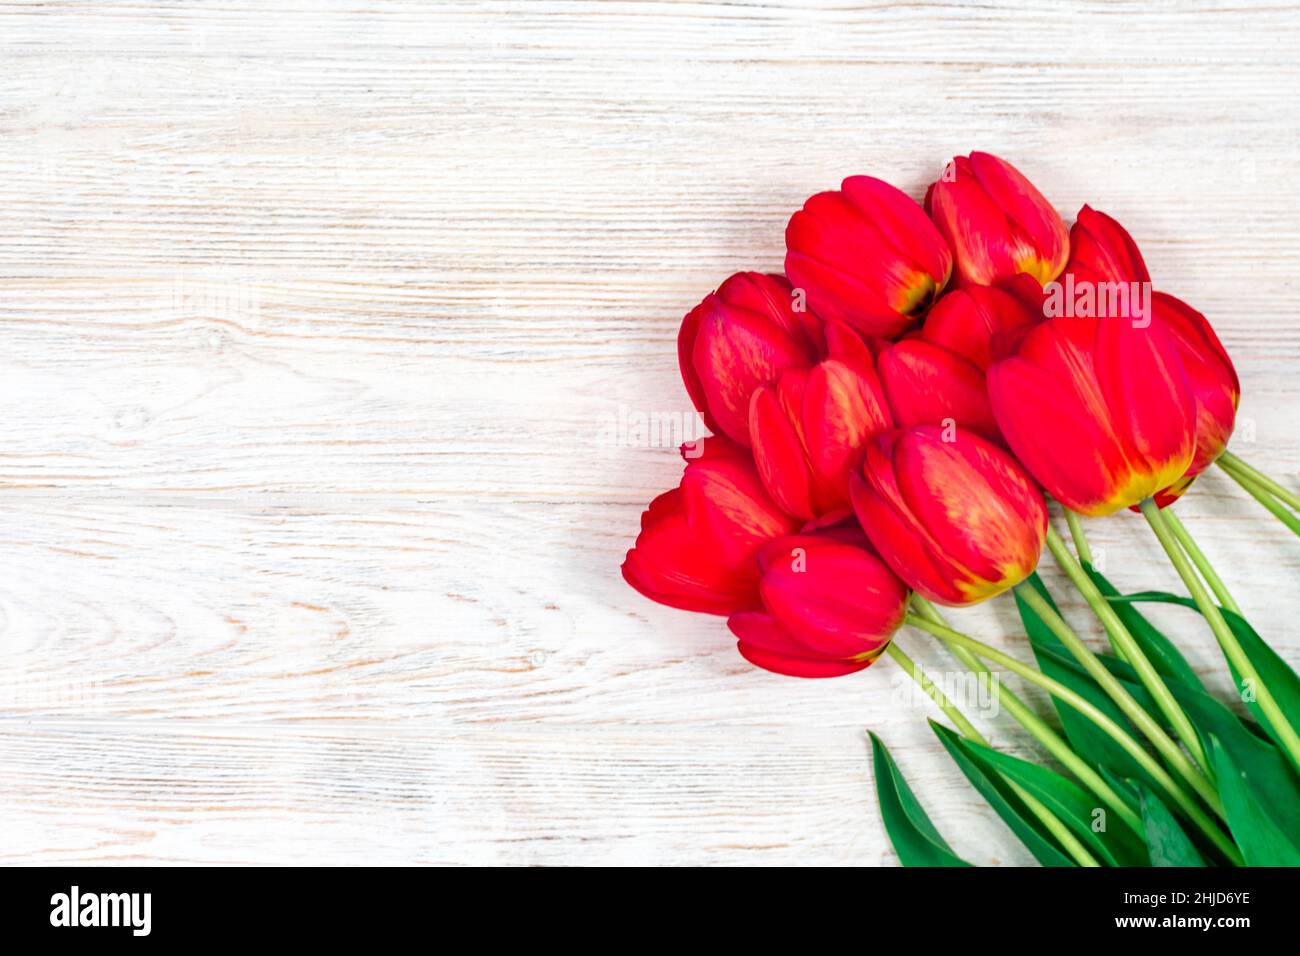 Red tulips flowers bouquet on old white wooden background. Top view with copy space. Stock Photo